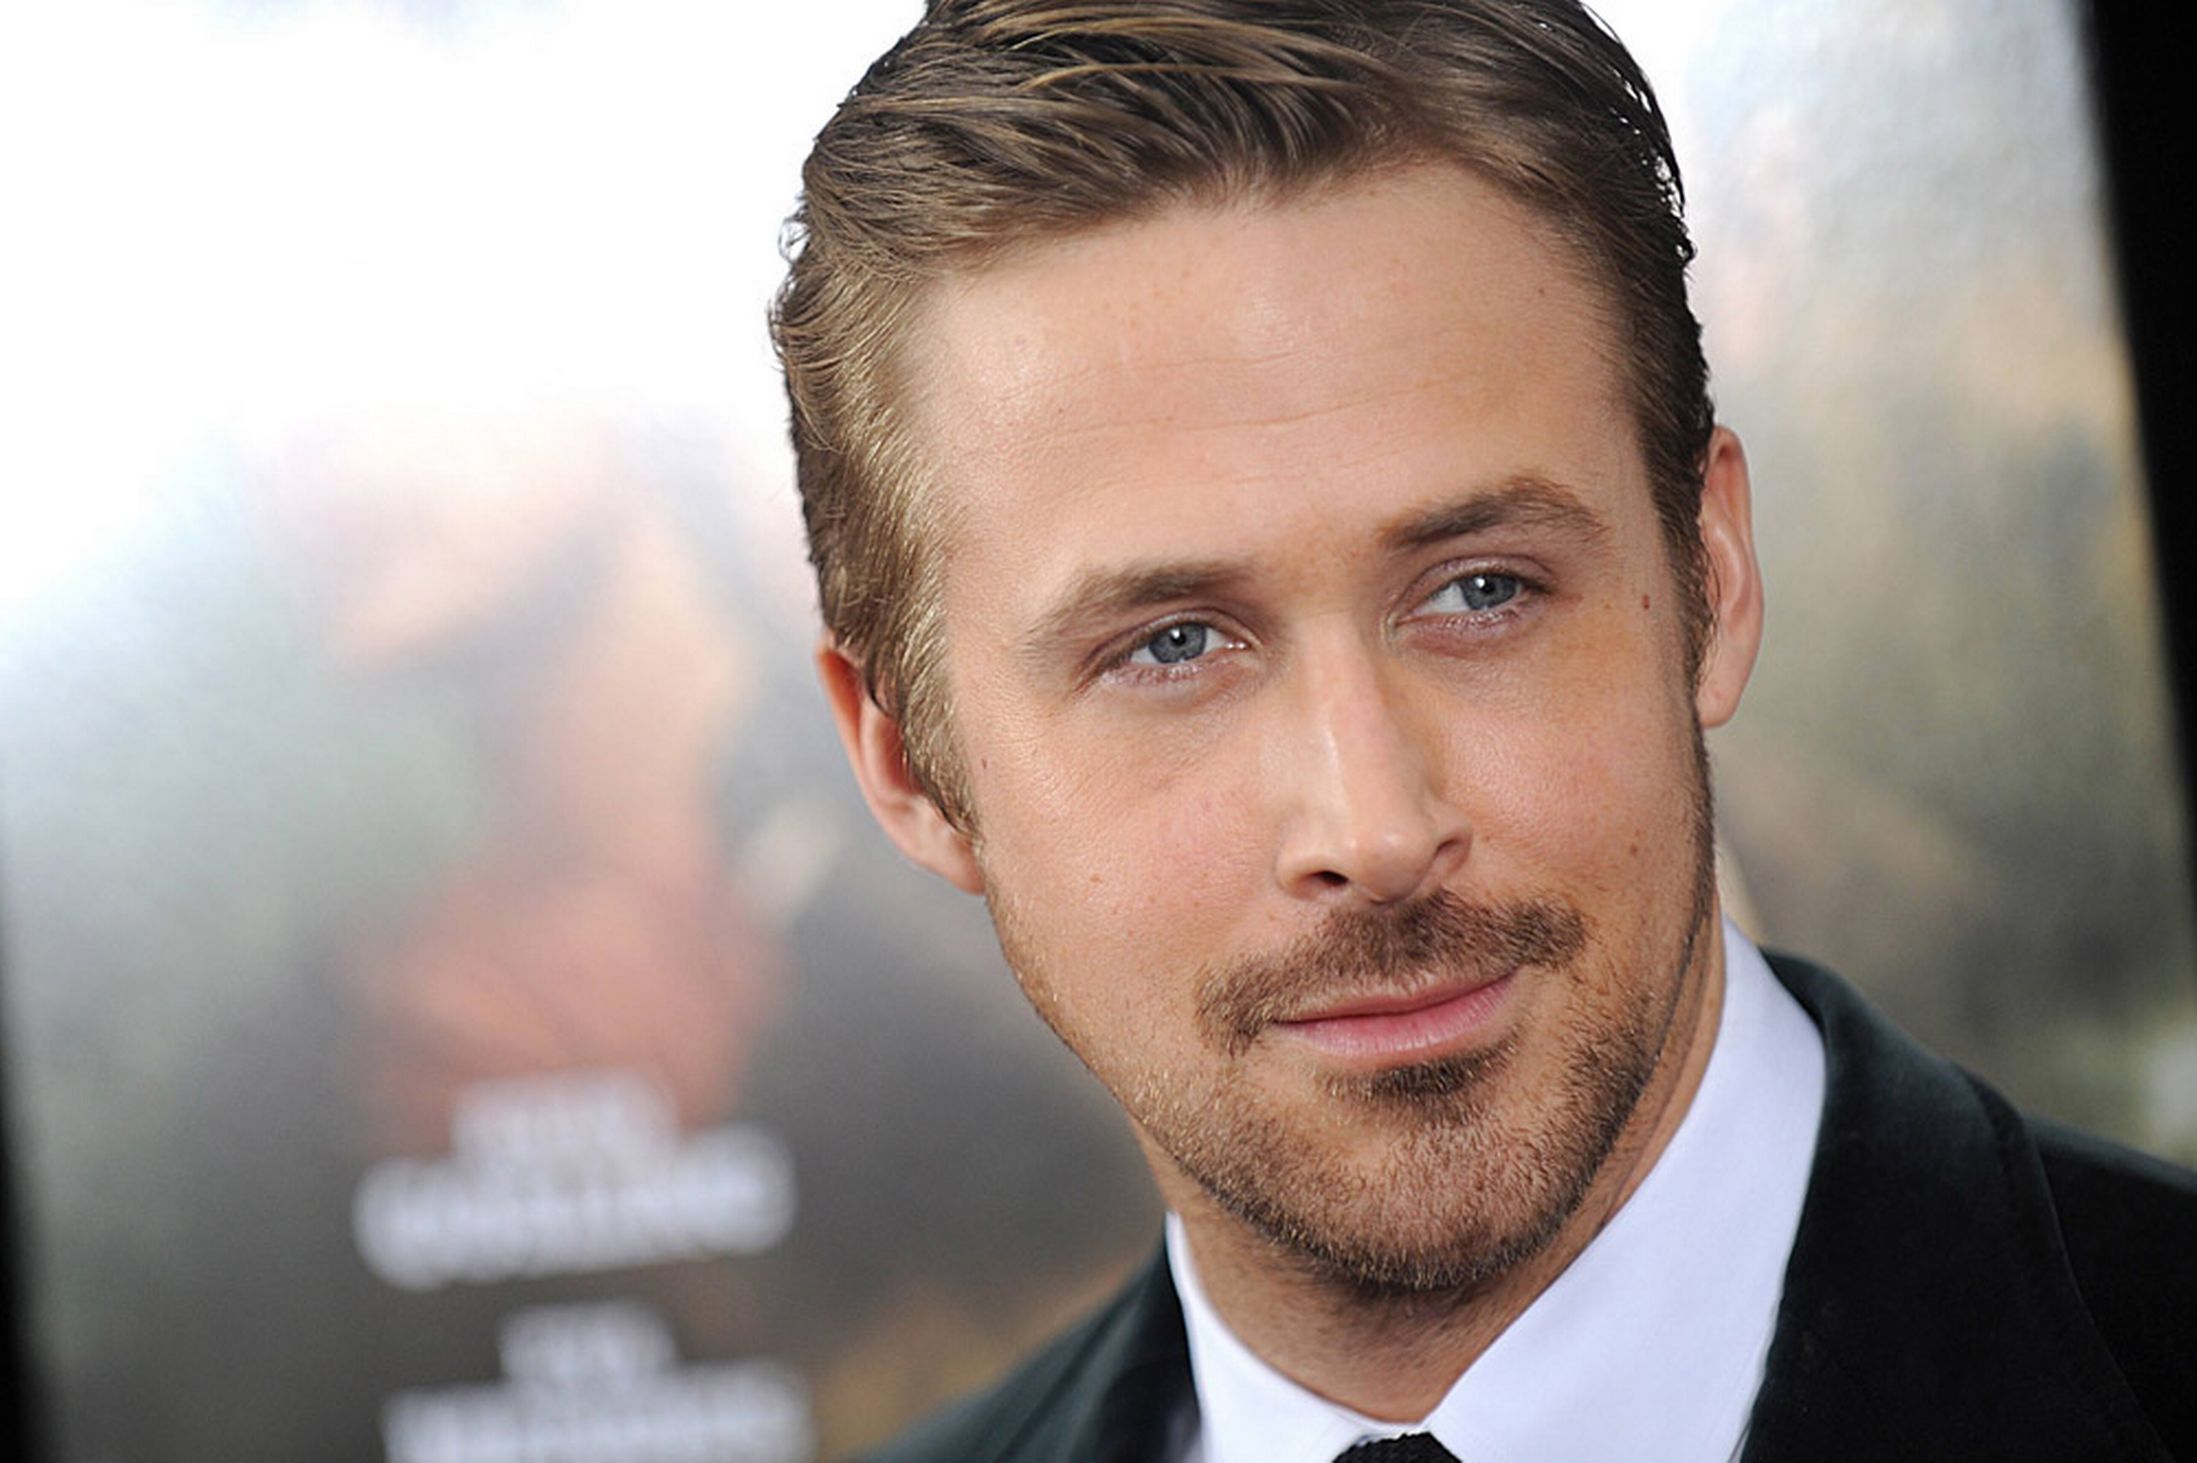 Amazing Ryan Gosling Pictures & Backgrounds